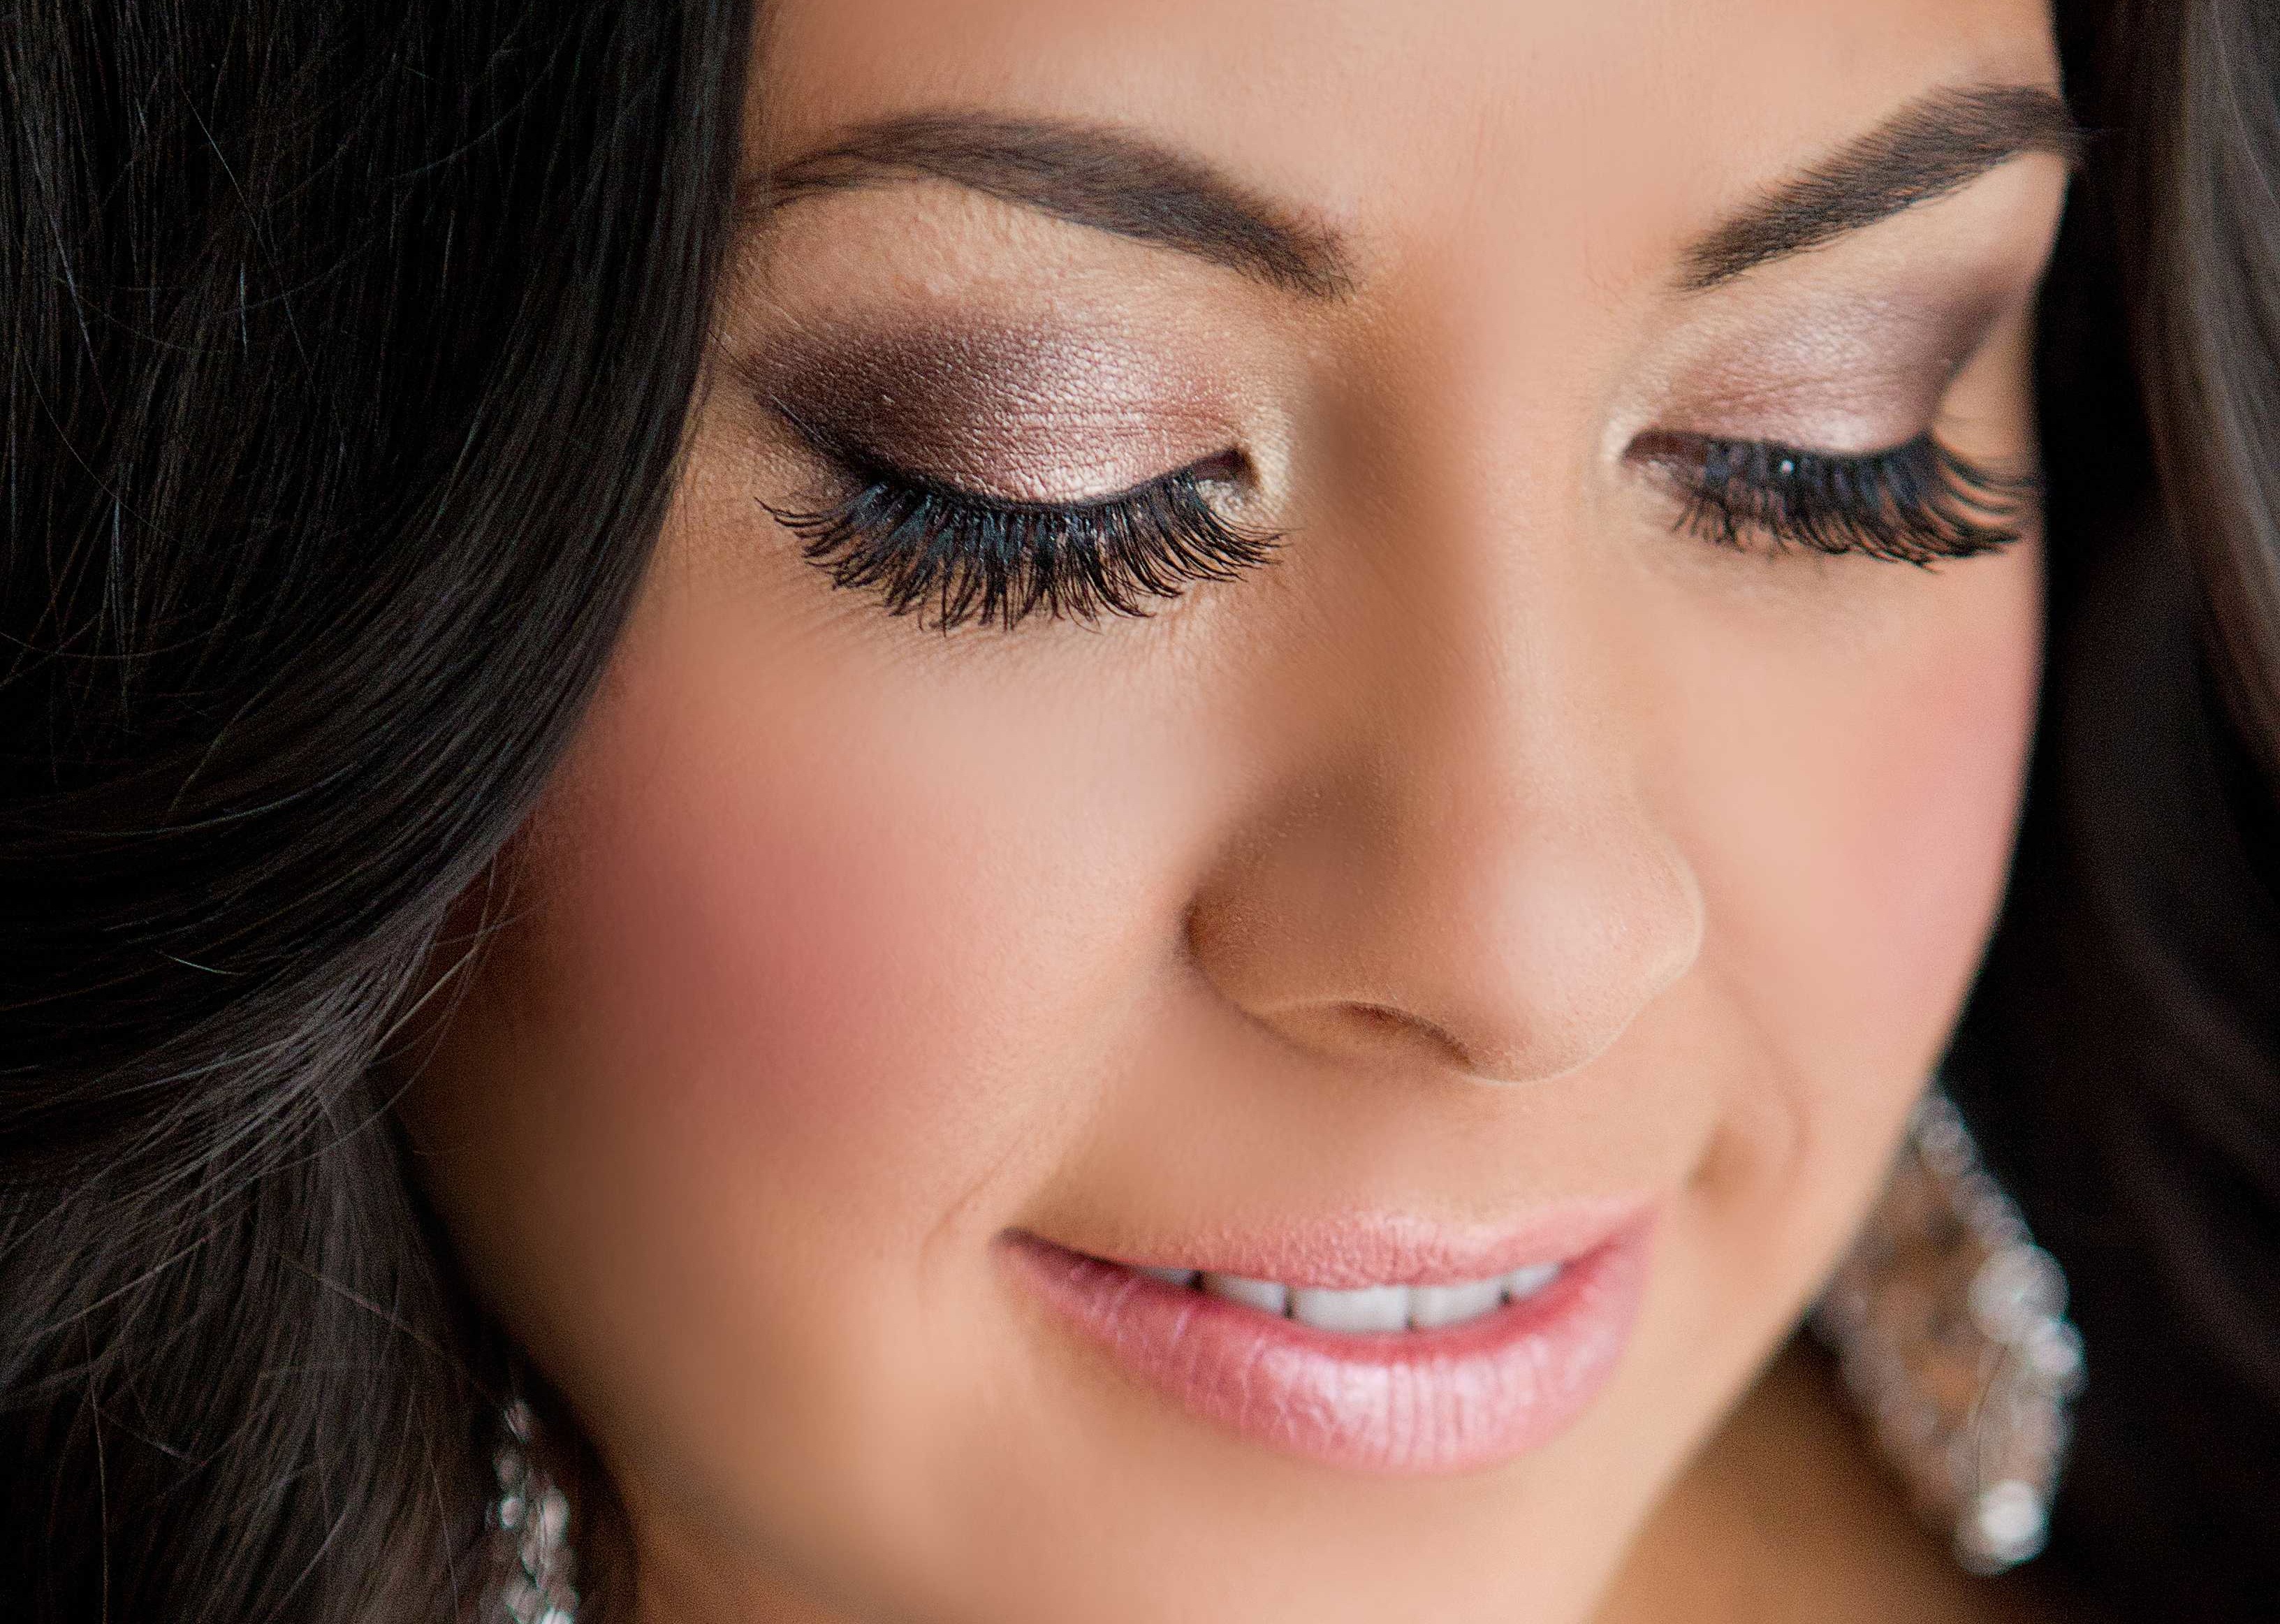 Wedding makeup ideas for brown eyes